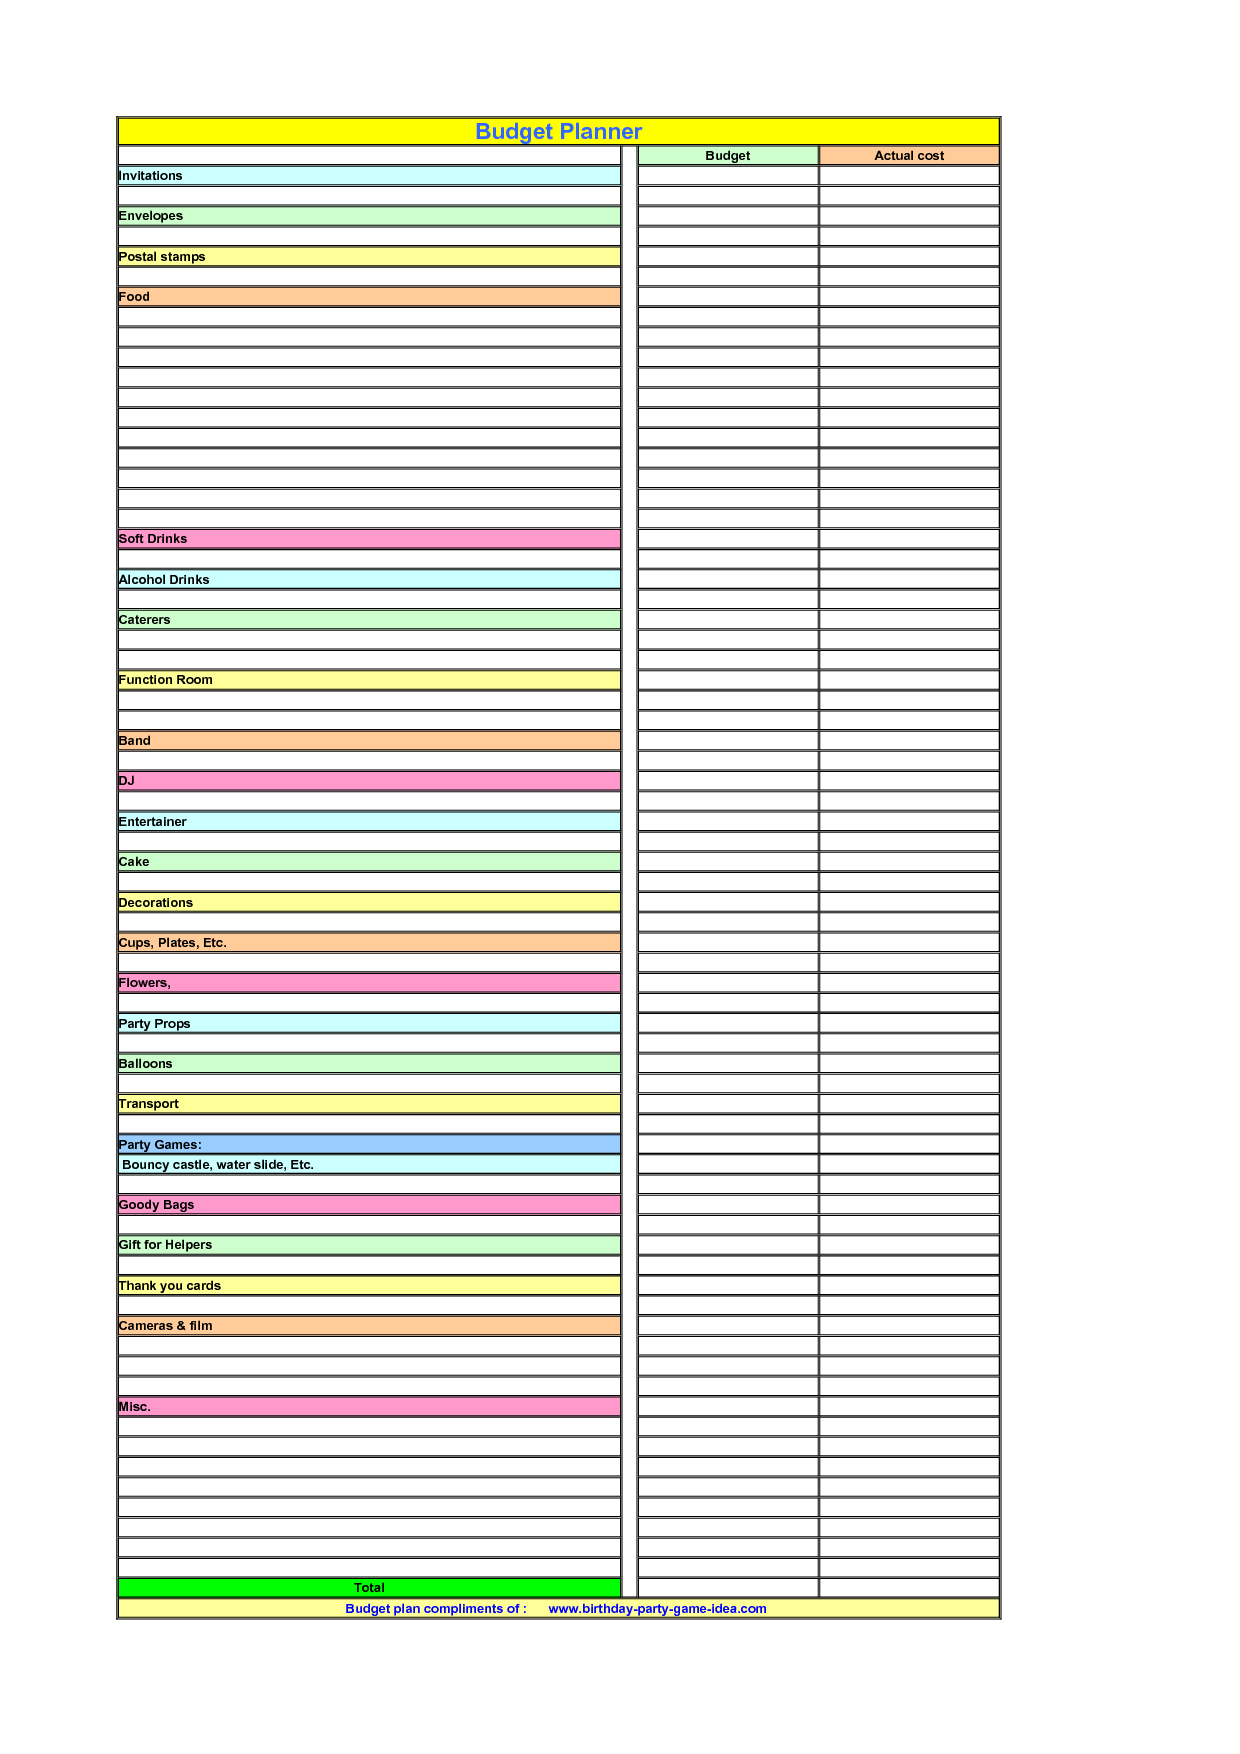 6-best-images-of-budget-printable-home-planner-free-printable-monthly